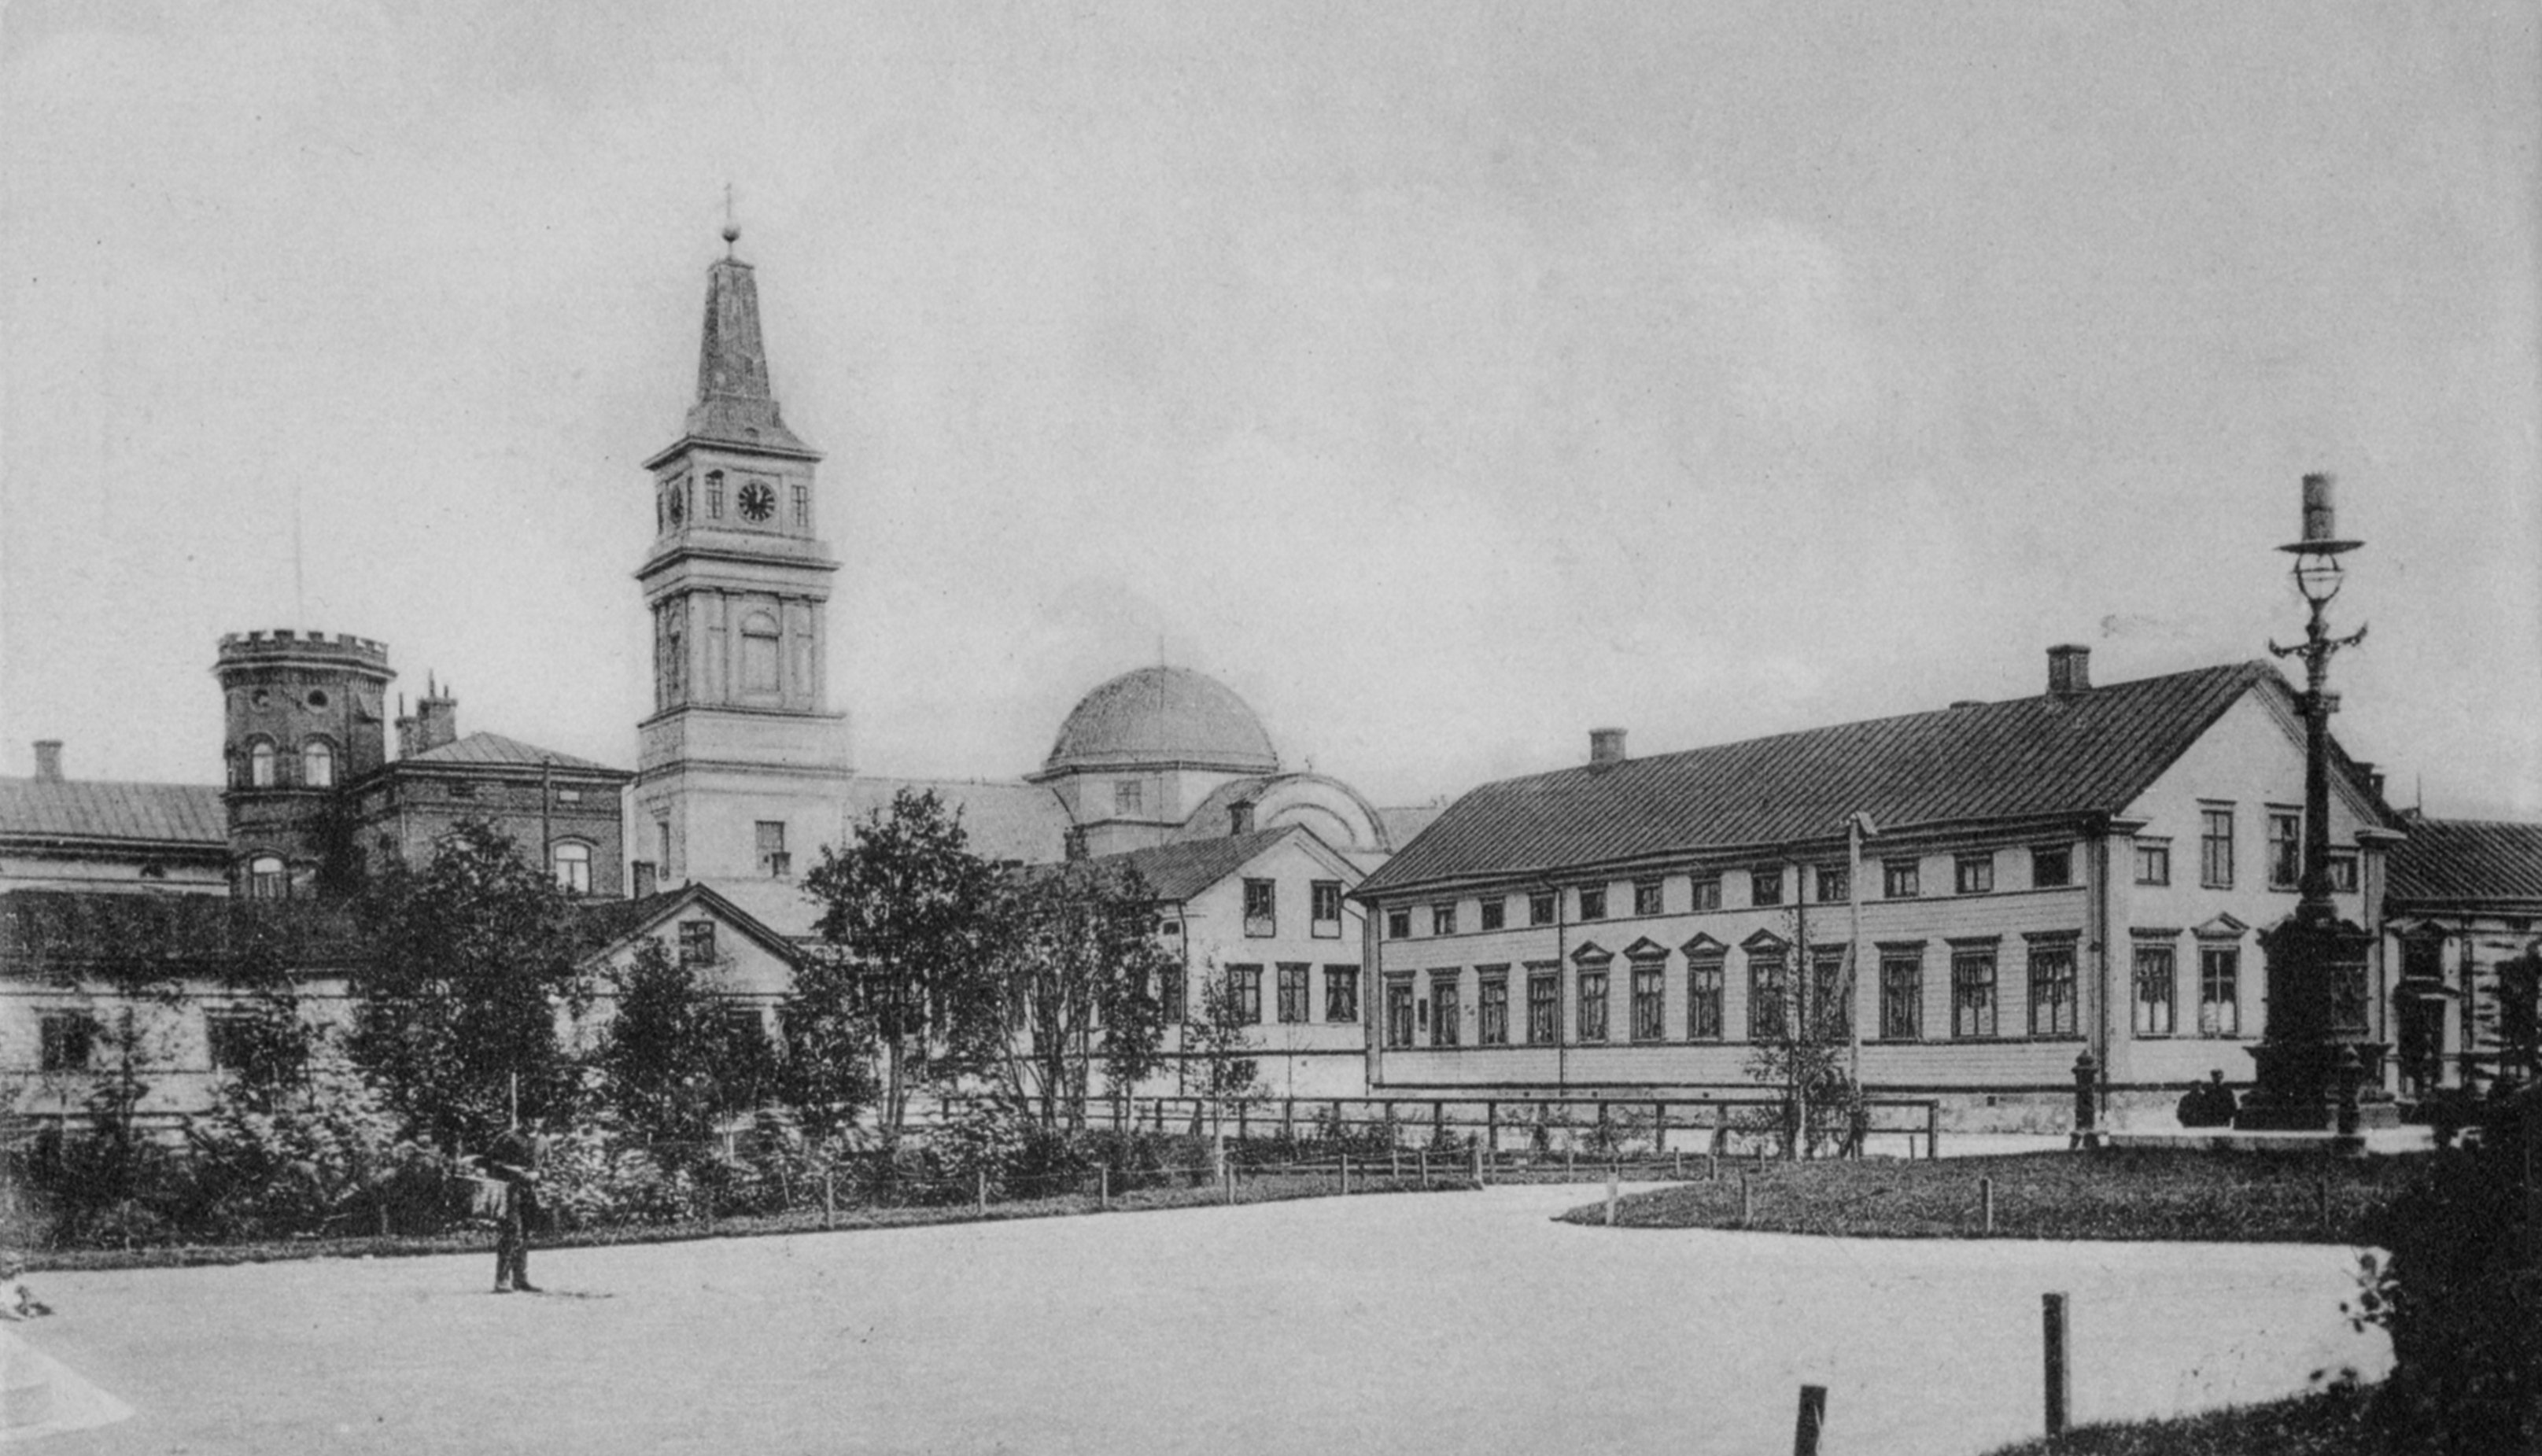 Oulu Cathedral 1890s - The Oulu Cathedral seen from the city hall square in 1890s.